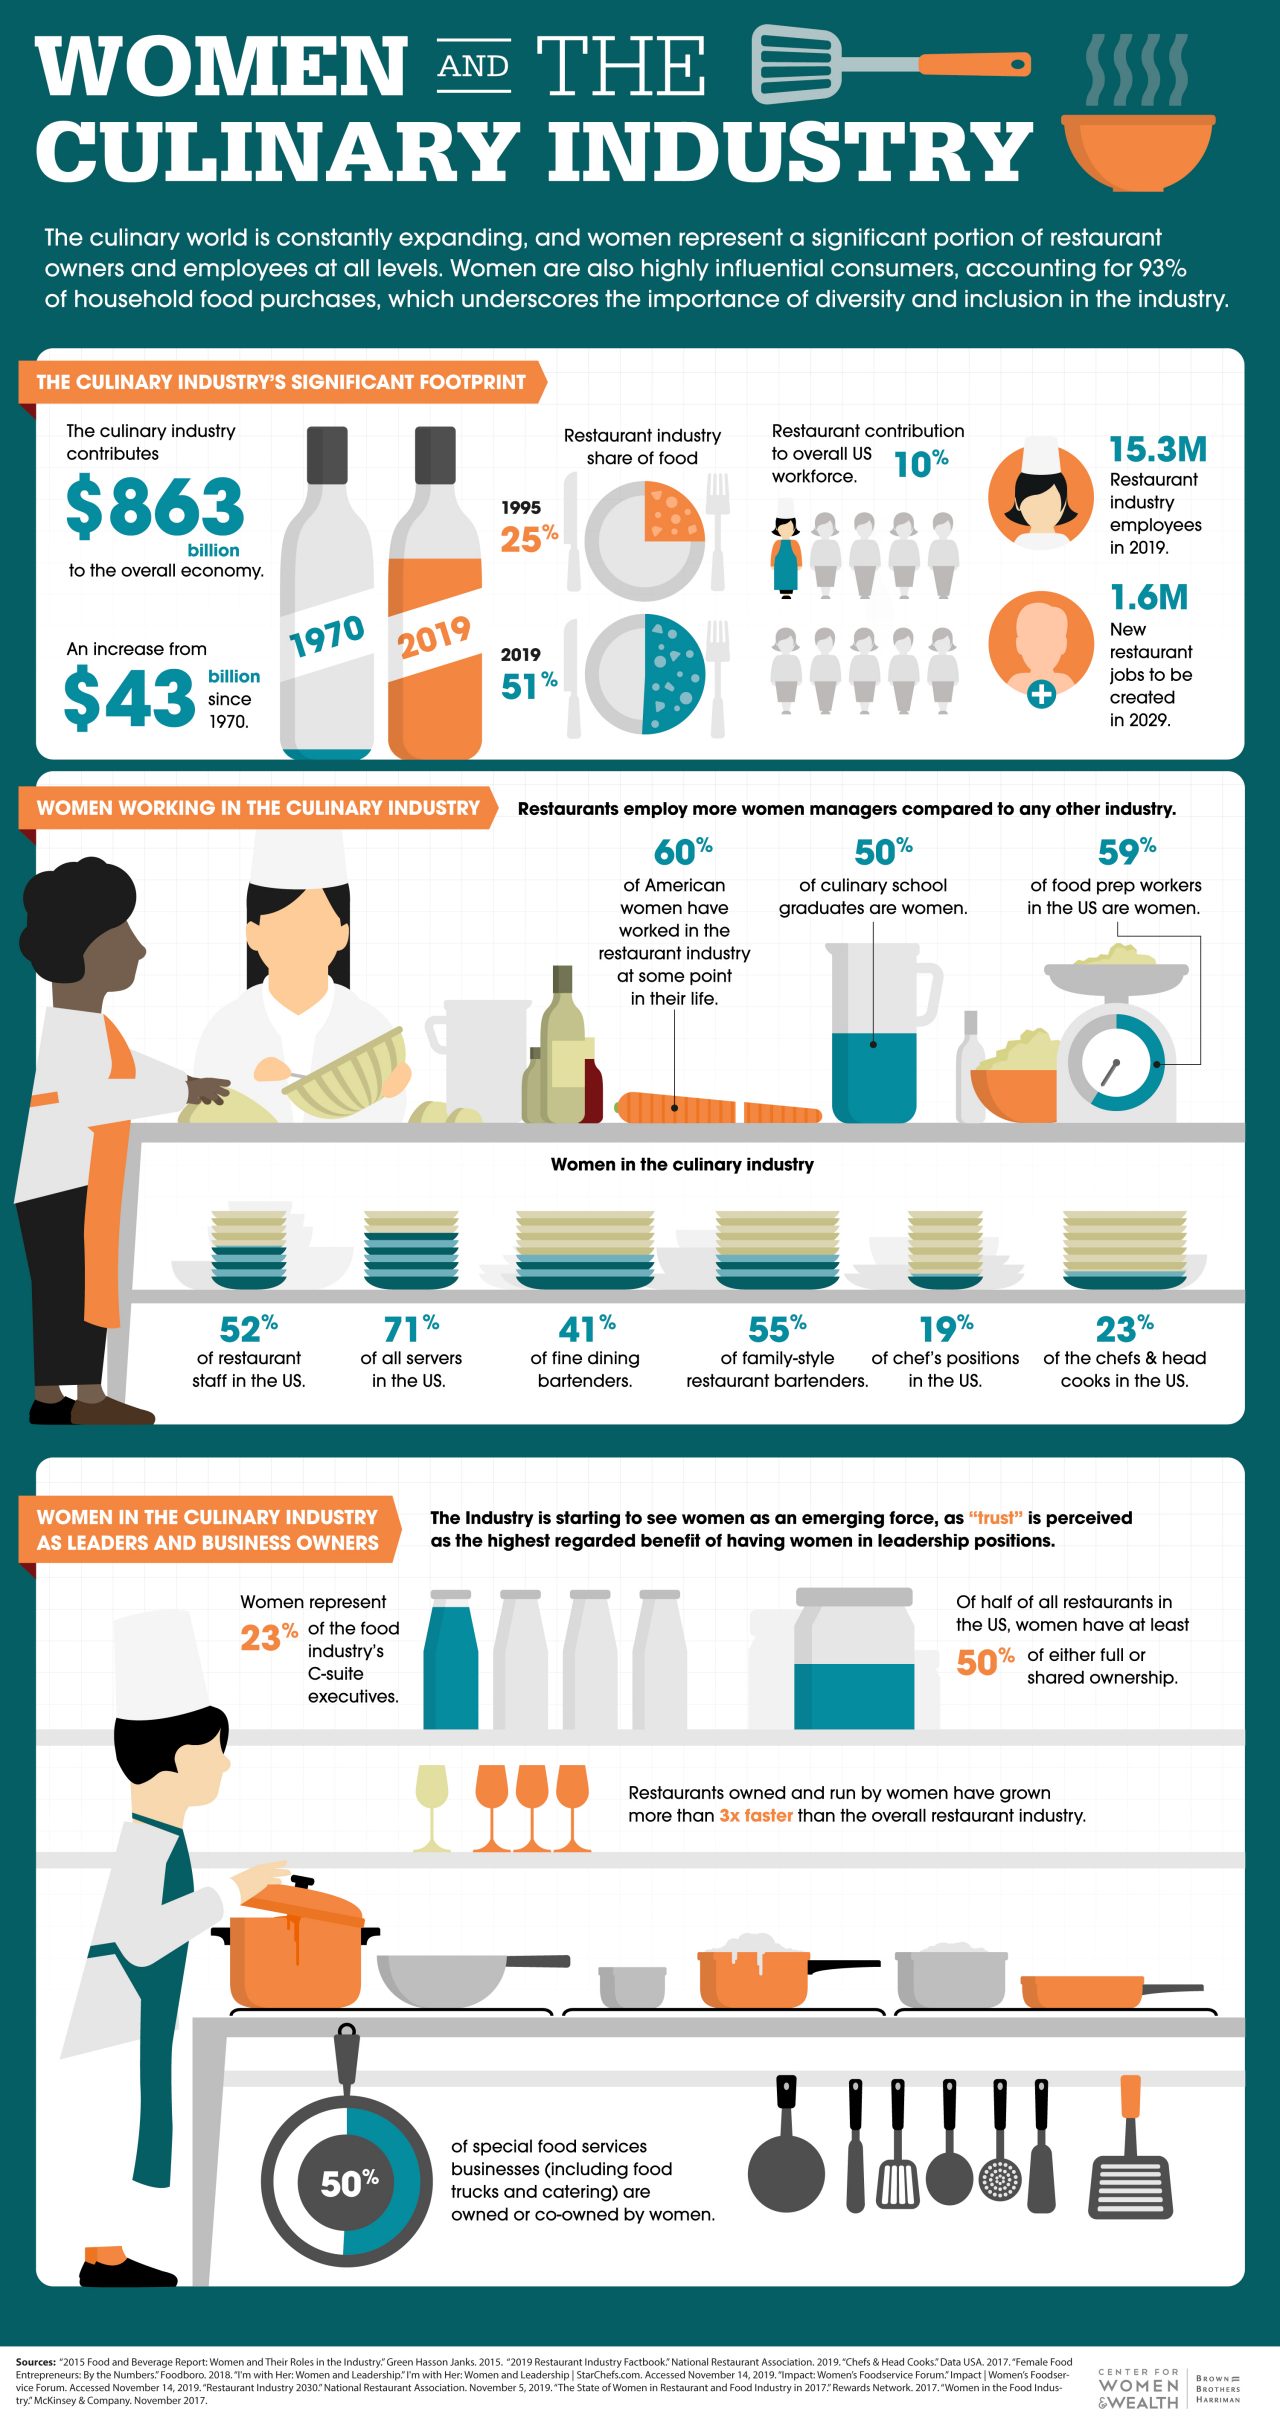 Statistics regarding women's impact on the culinary industry as both workers and as consumers